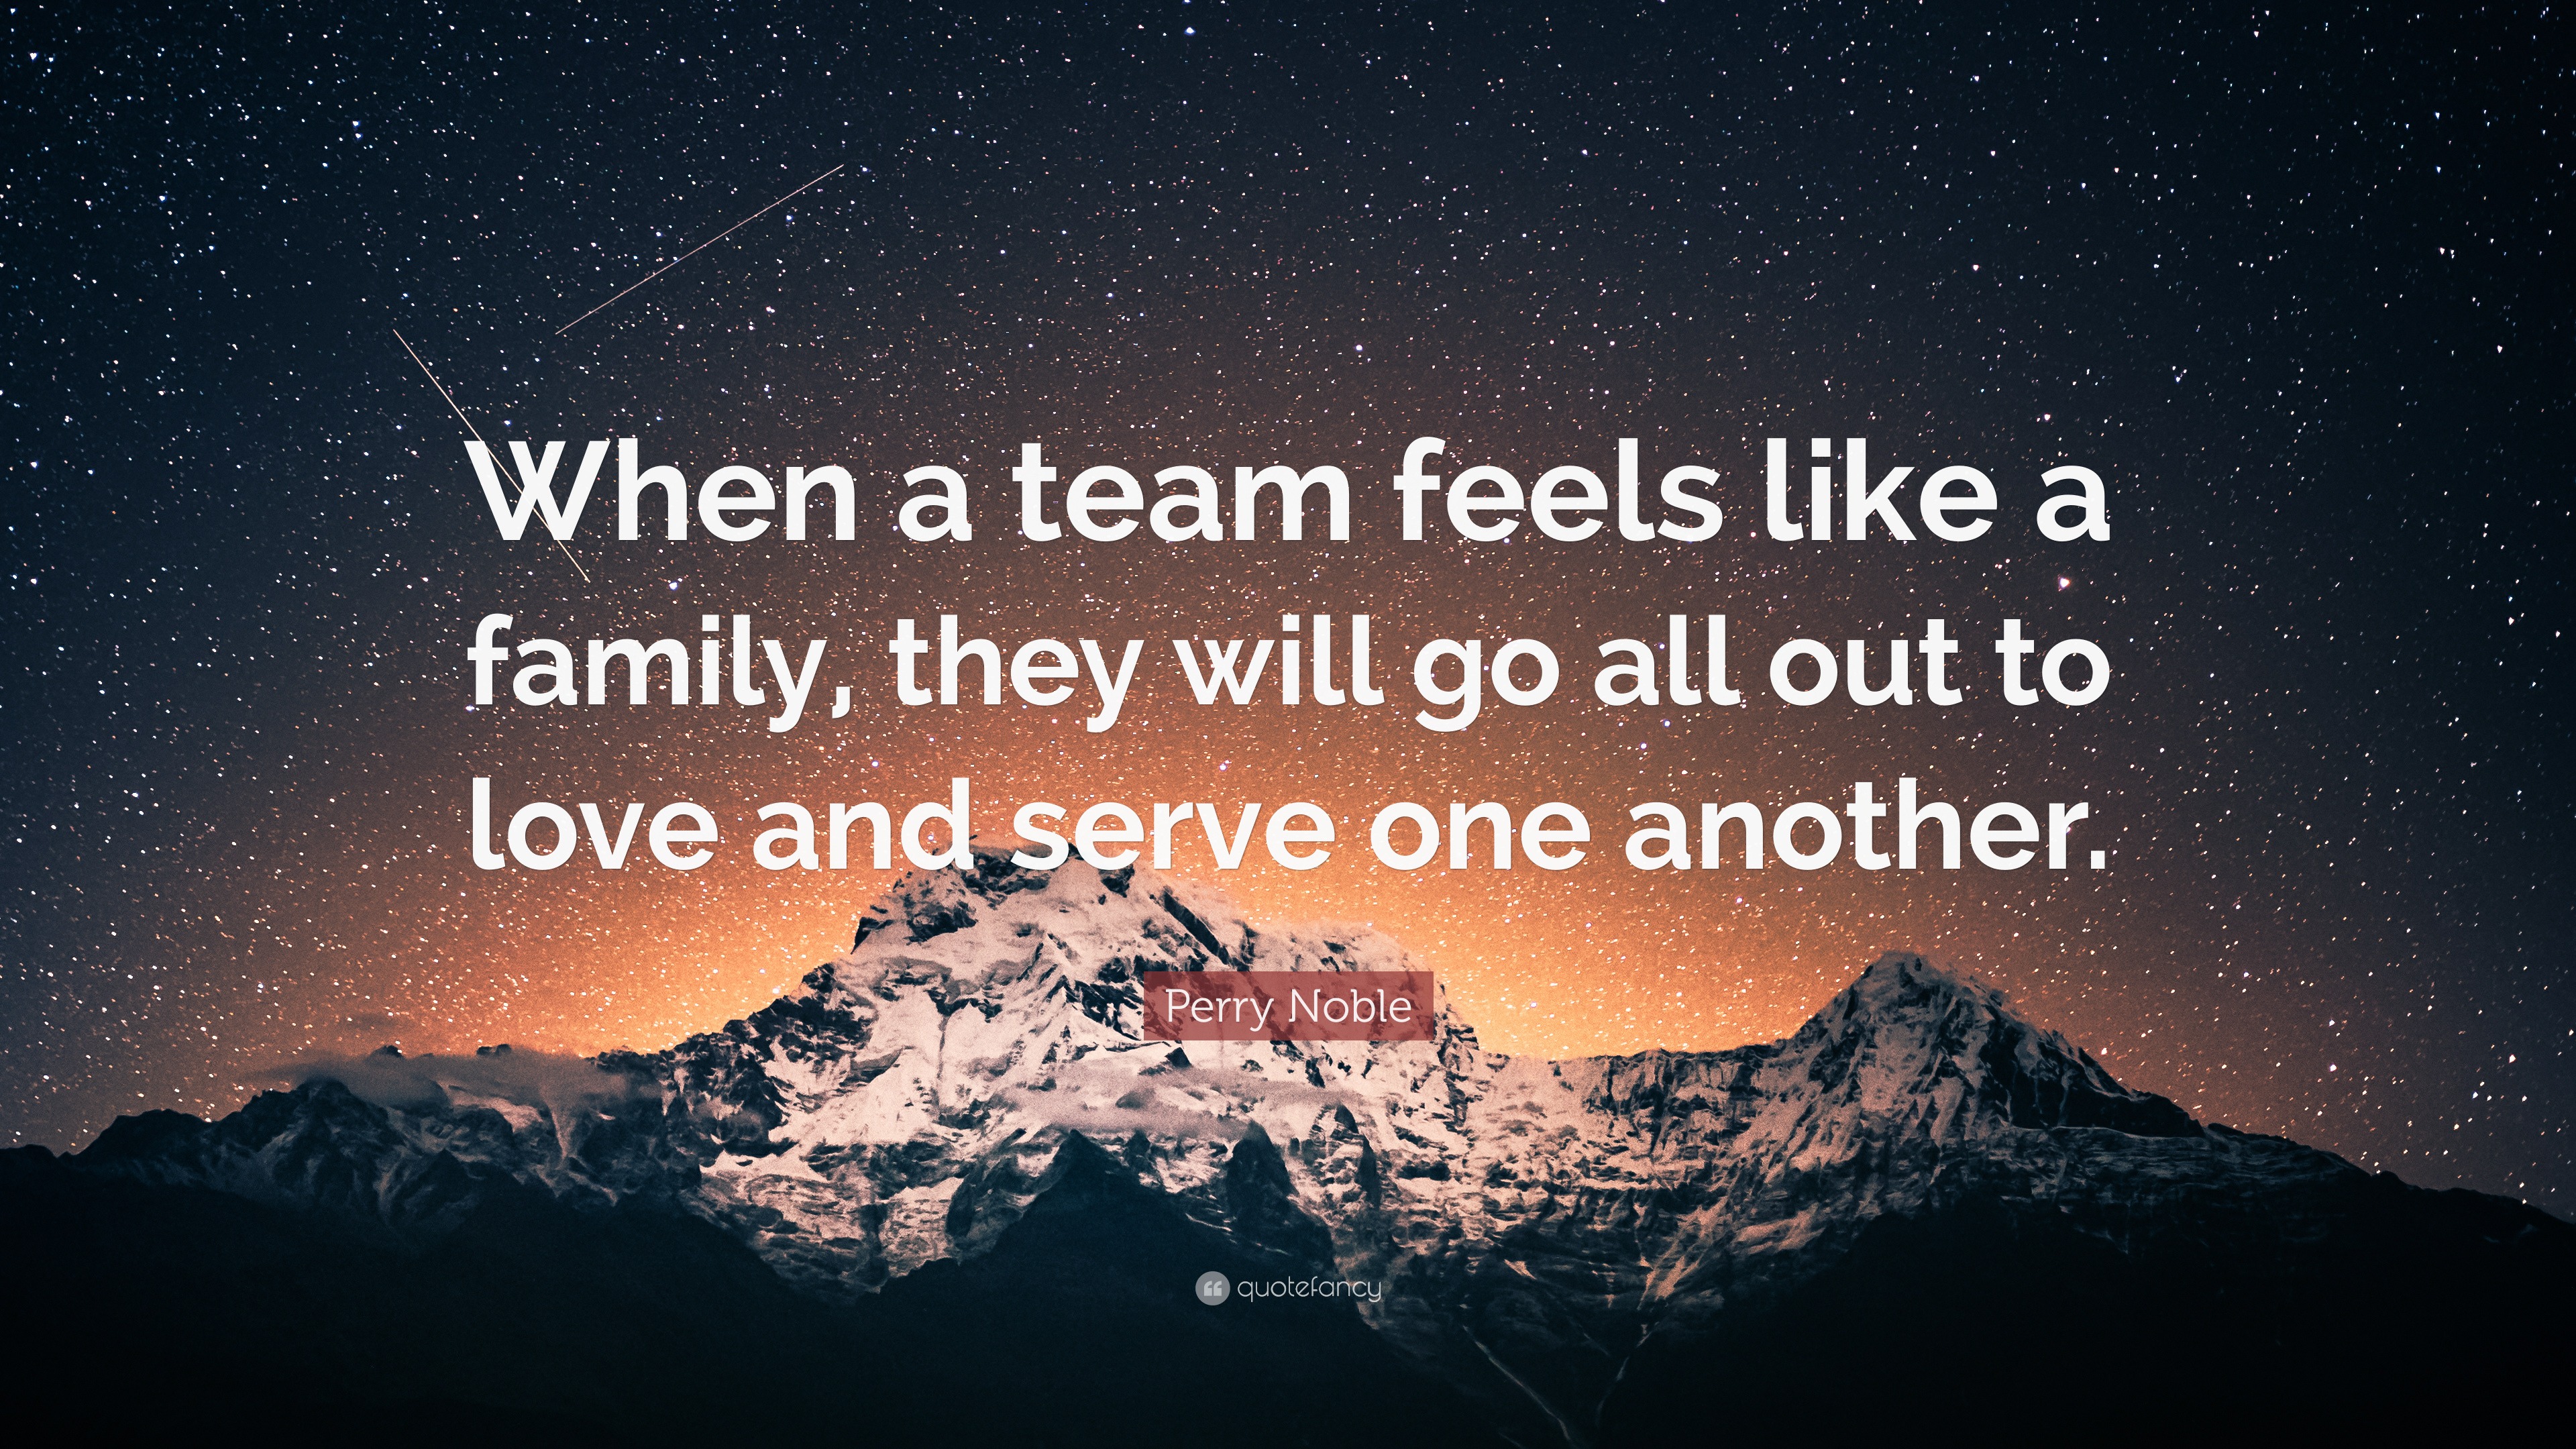 Team Is Like Family Quotes - Nelle Yalonda